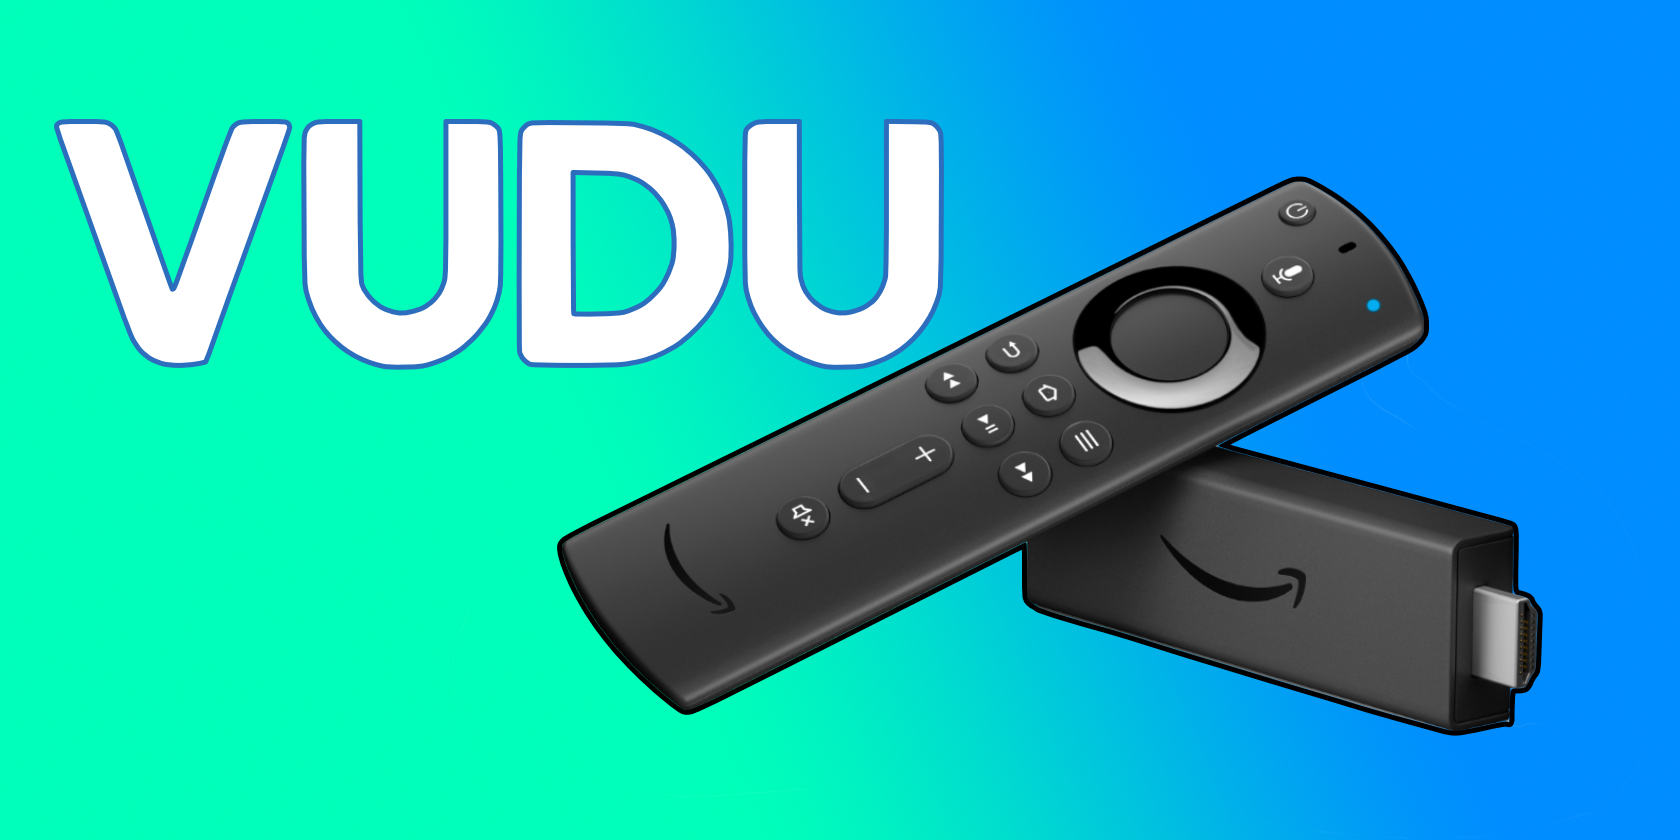 An illustration showing Amazon's Fire TV HDMI dongle and the Vudu logo set against a colorful background